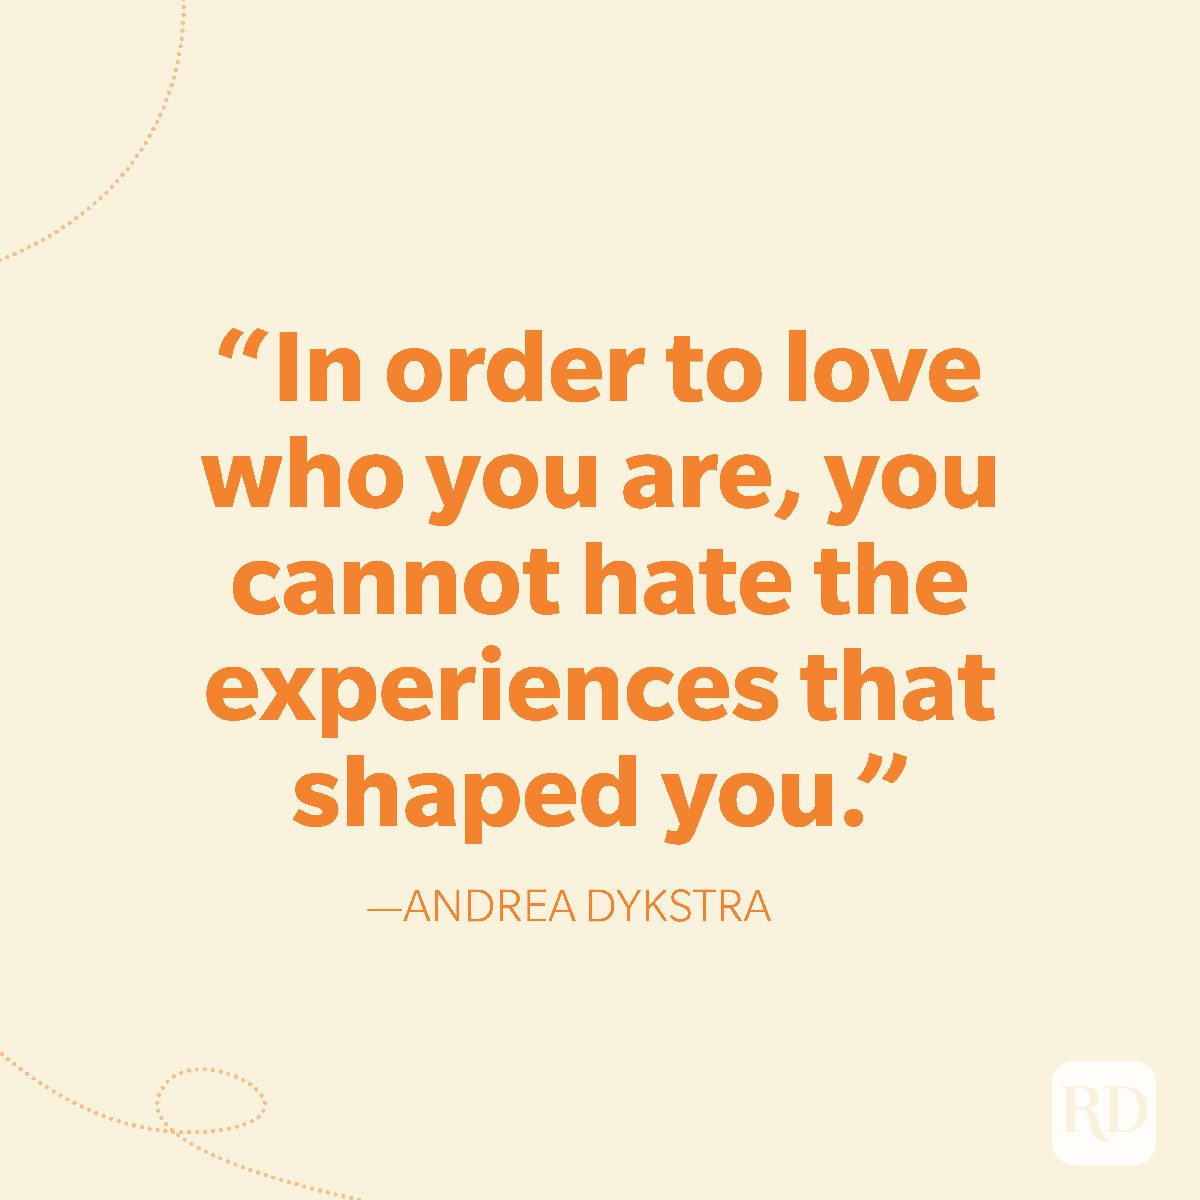 29-In order to love who you are, you cannot hate the experiences that shaped you